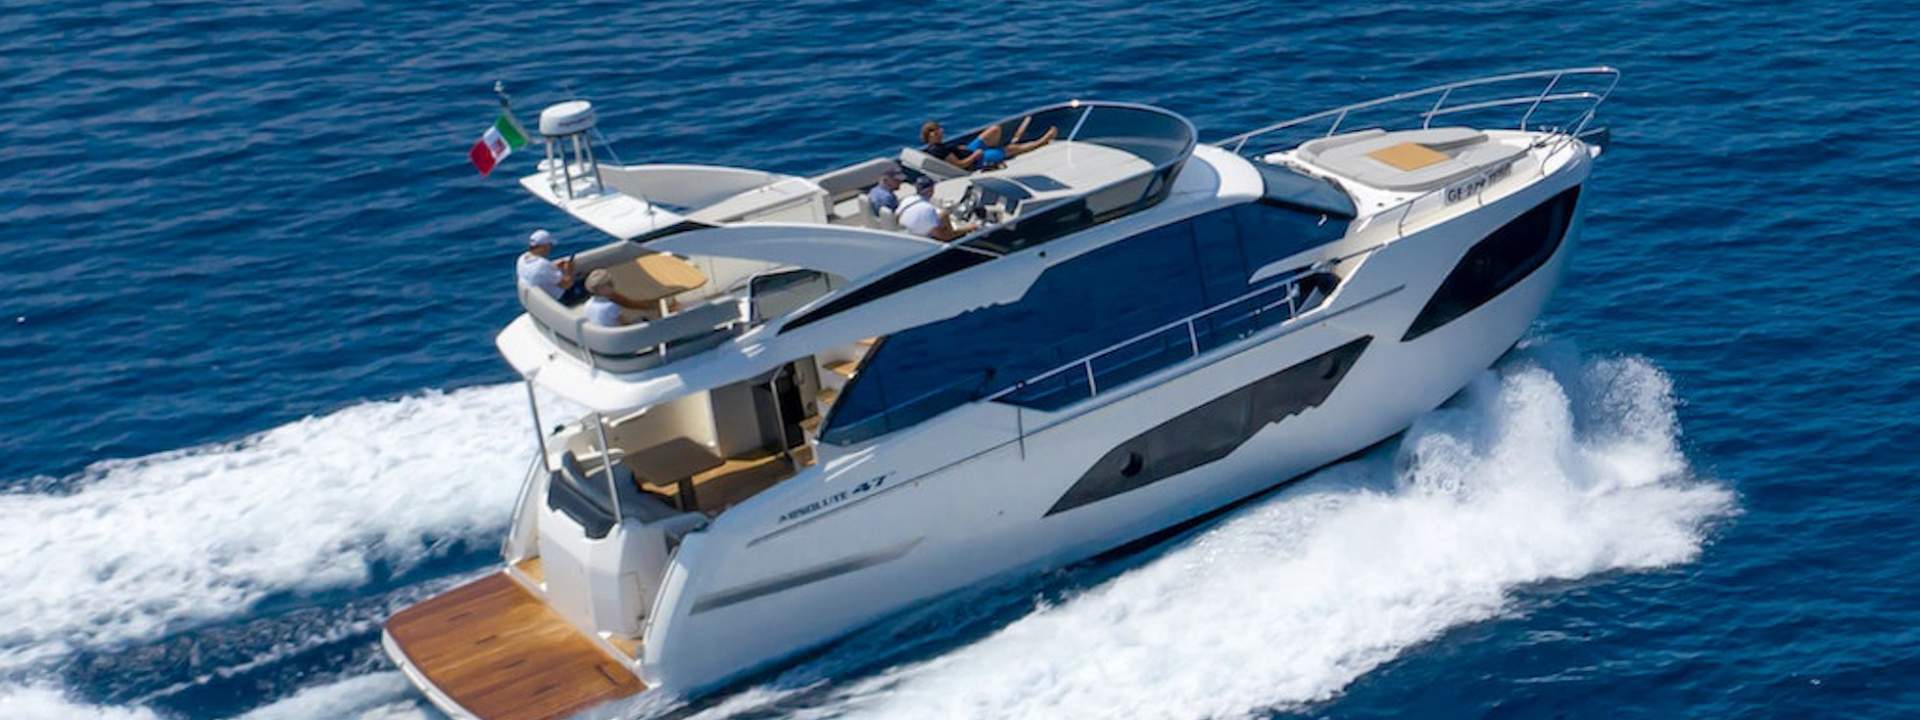 Yacht Absolute 47 Fly